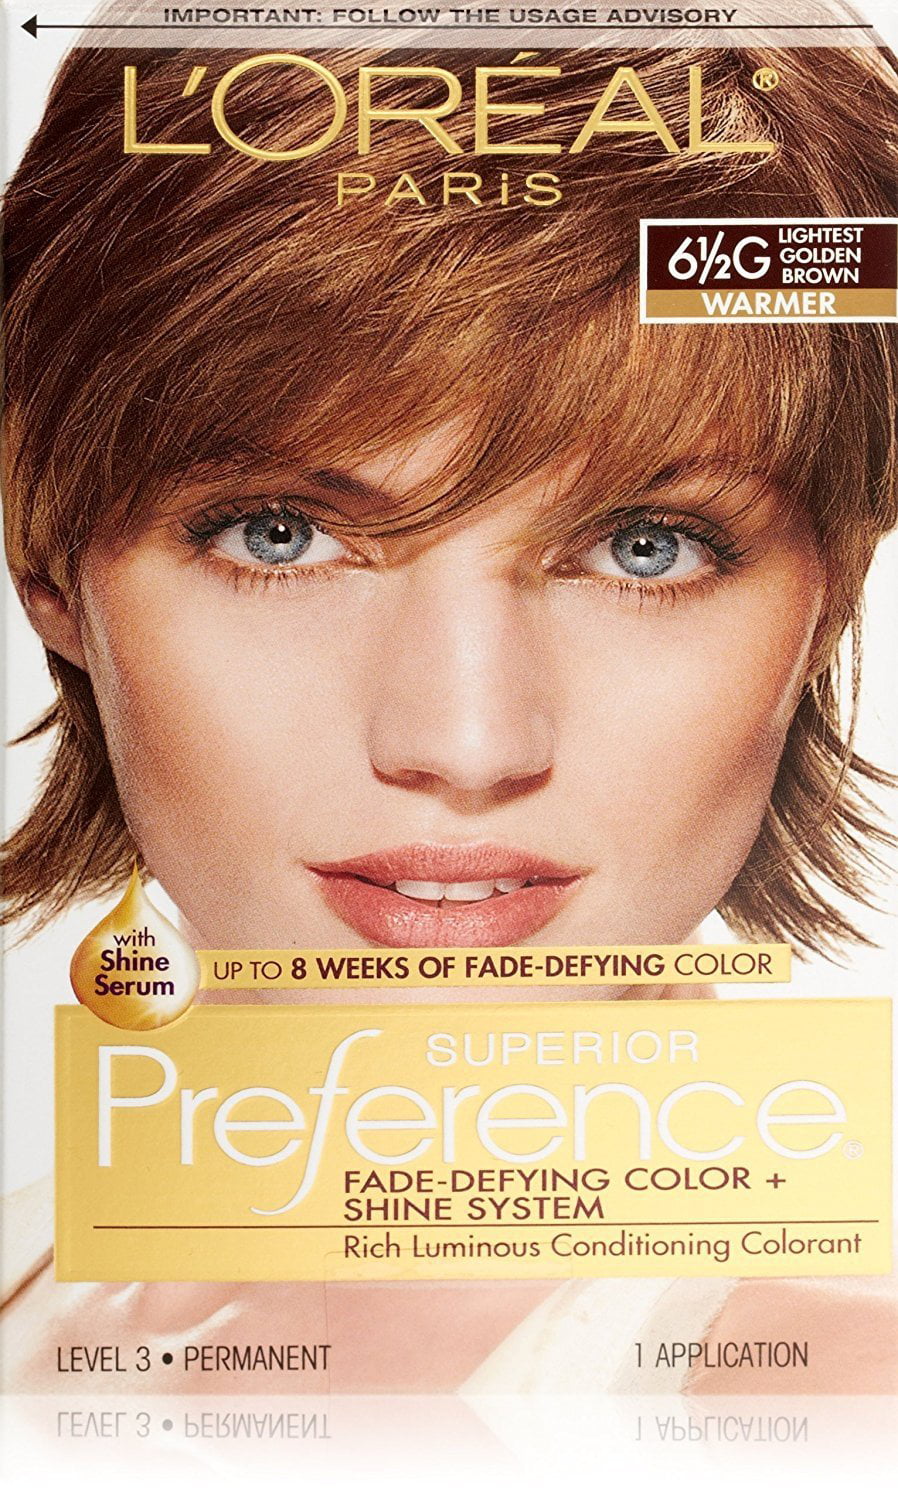 L'Oreal Paris Superior Preference Fade-Defying Color + Shine System, 6